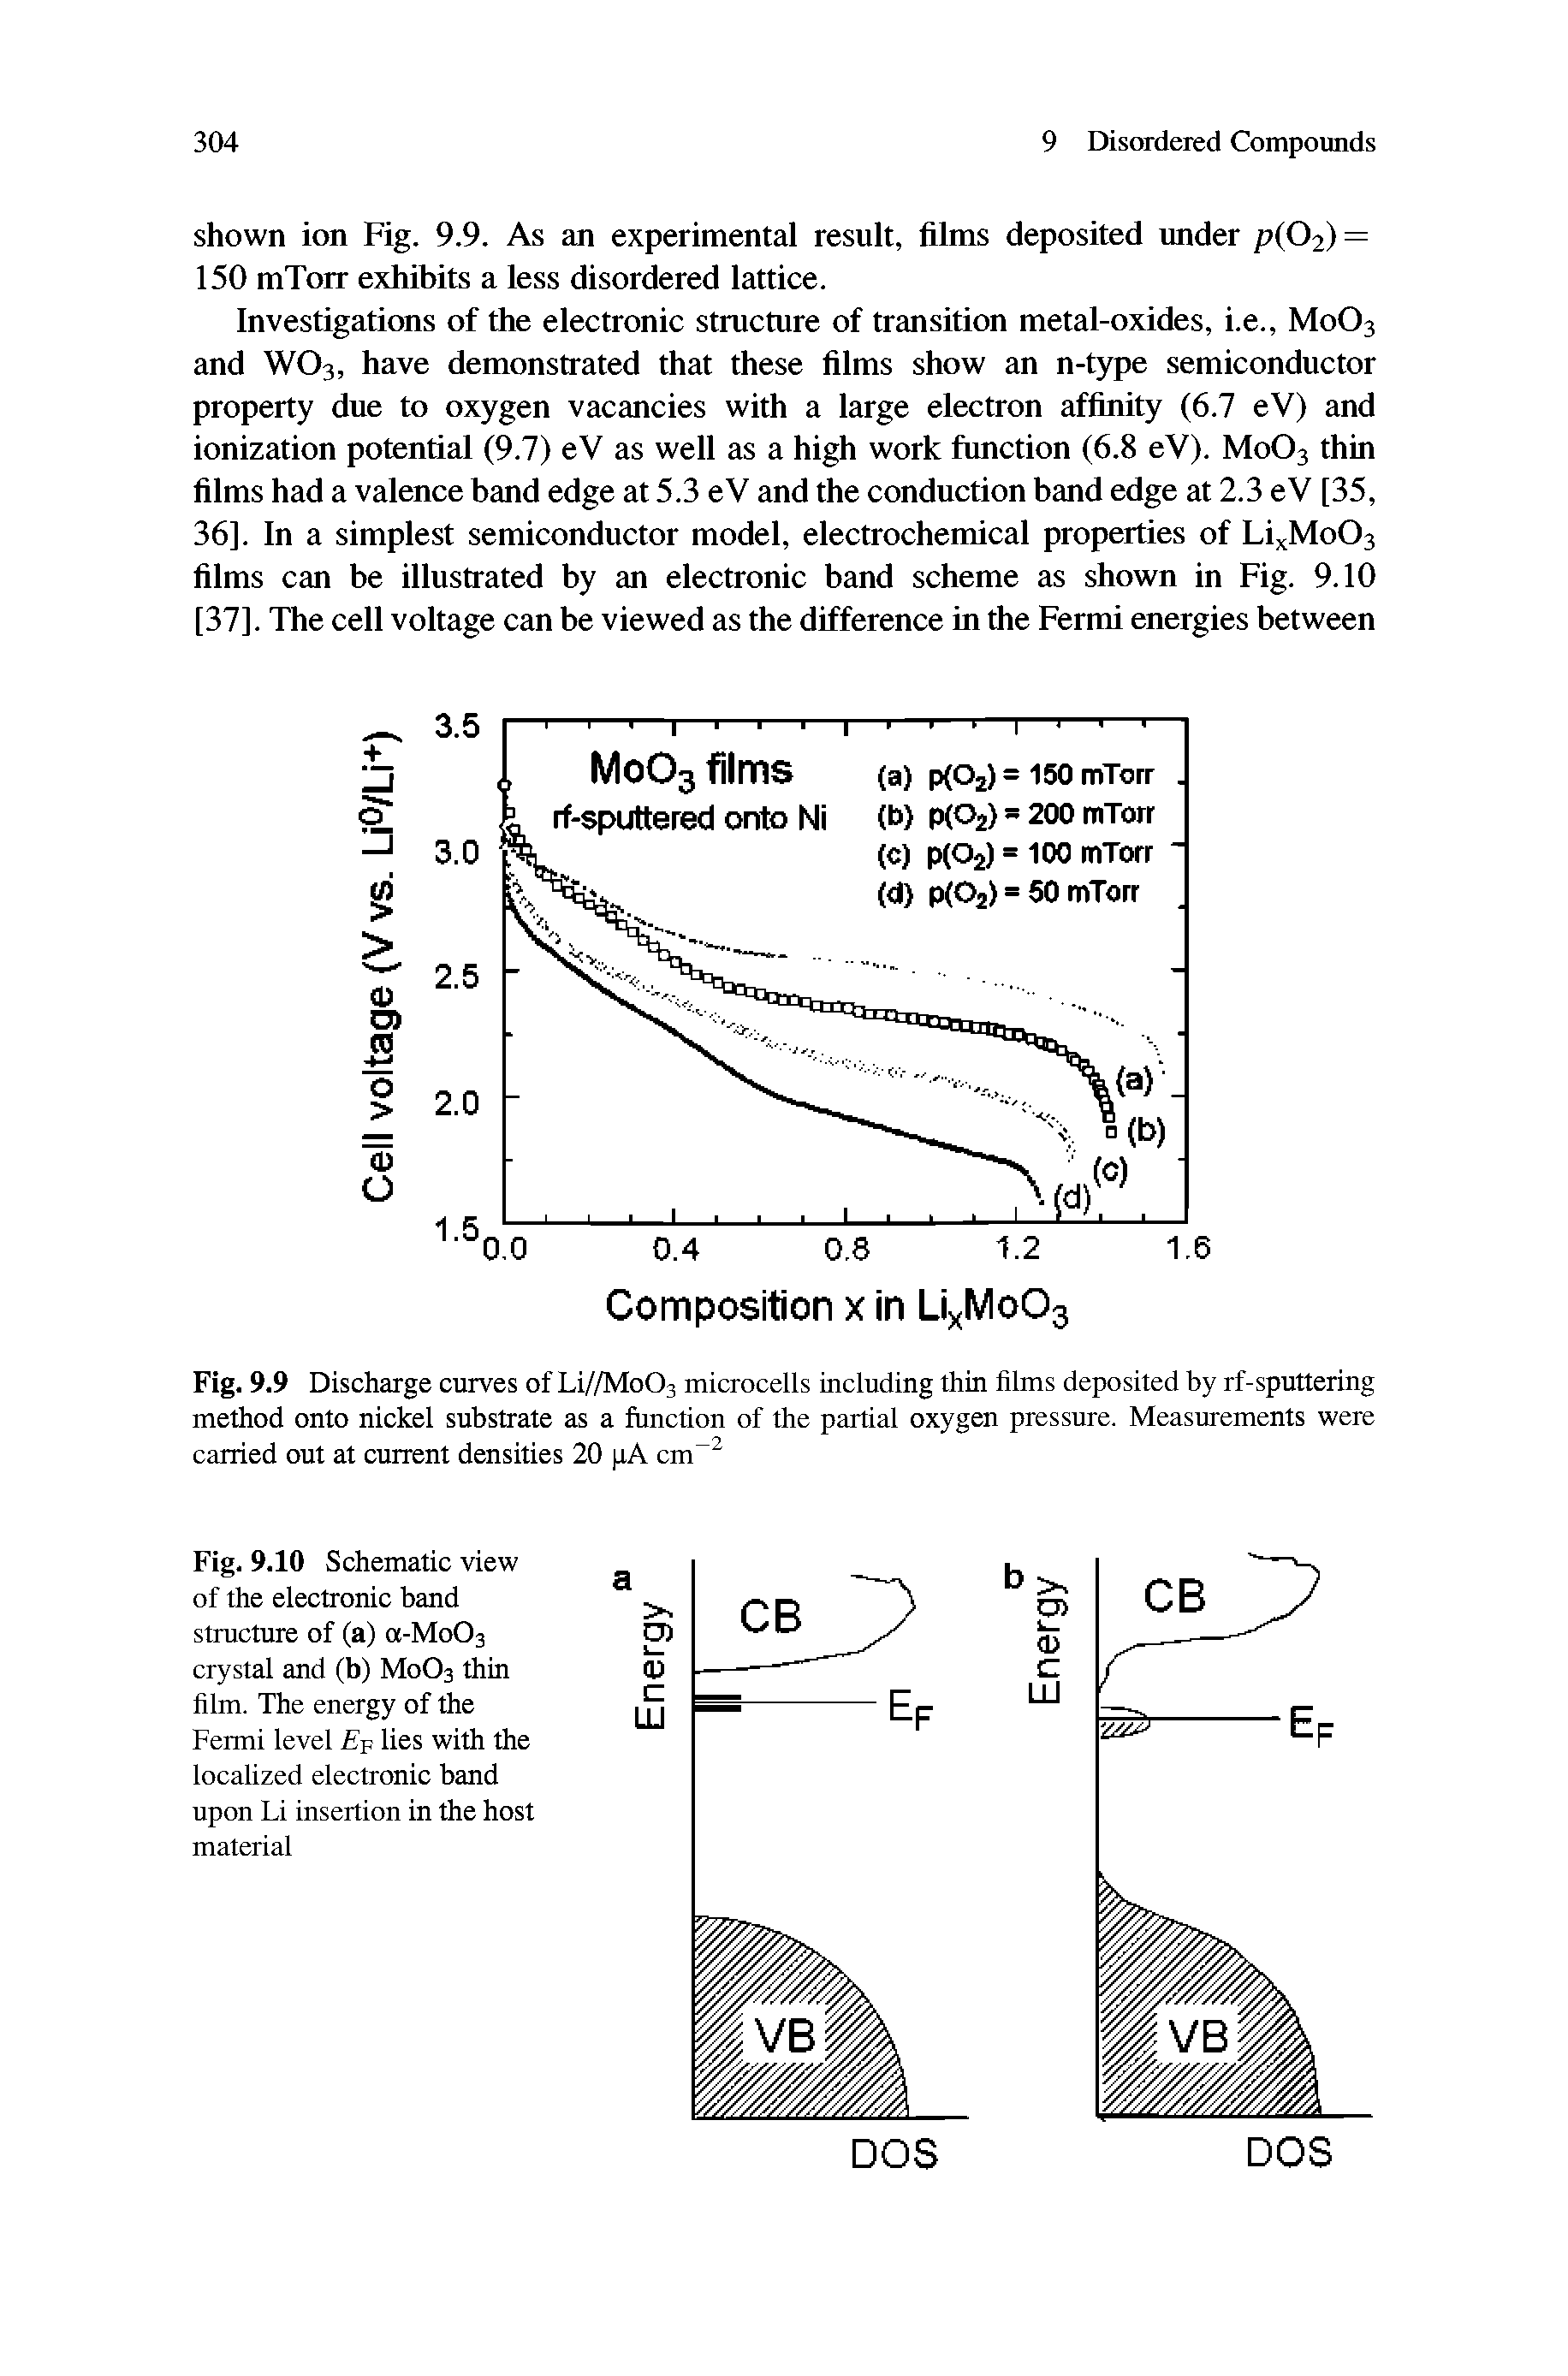 Fig. 9.9 Discharge curves of Li//Mo03 microcells including thin films deposited by rf-sputtering method onto nickel substrate as a function of the partial oxygen pressure. Measurements were carried out at current densities 20 pA cm ...